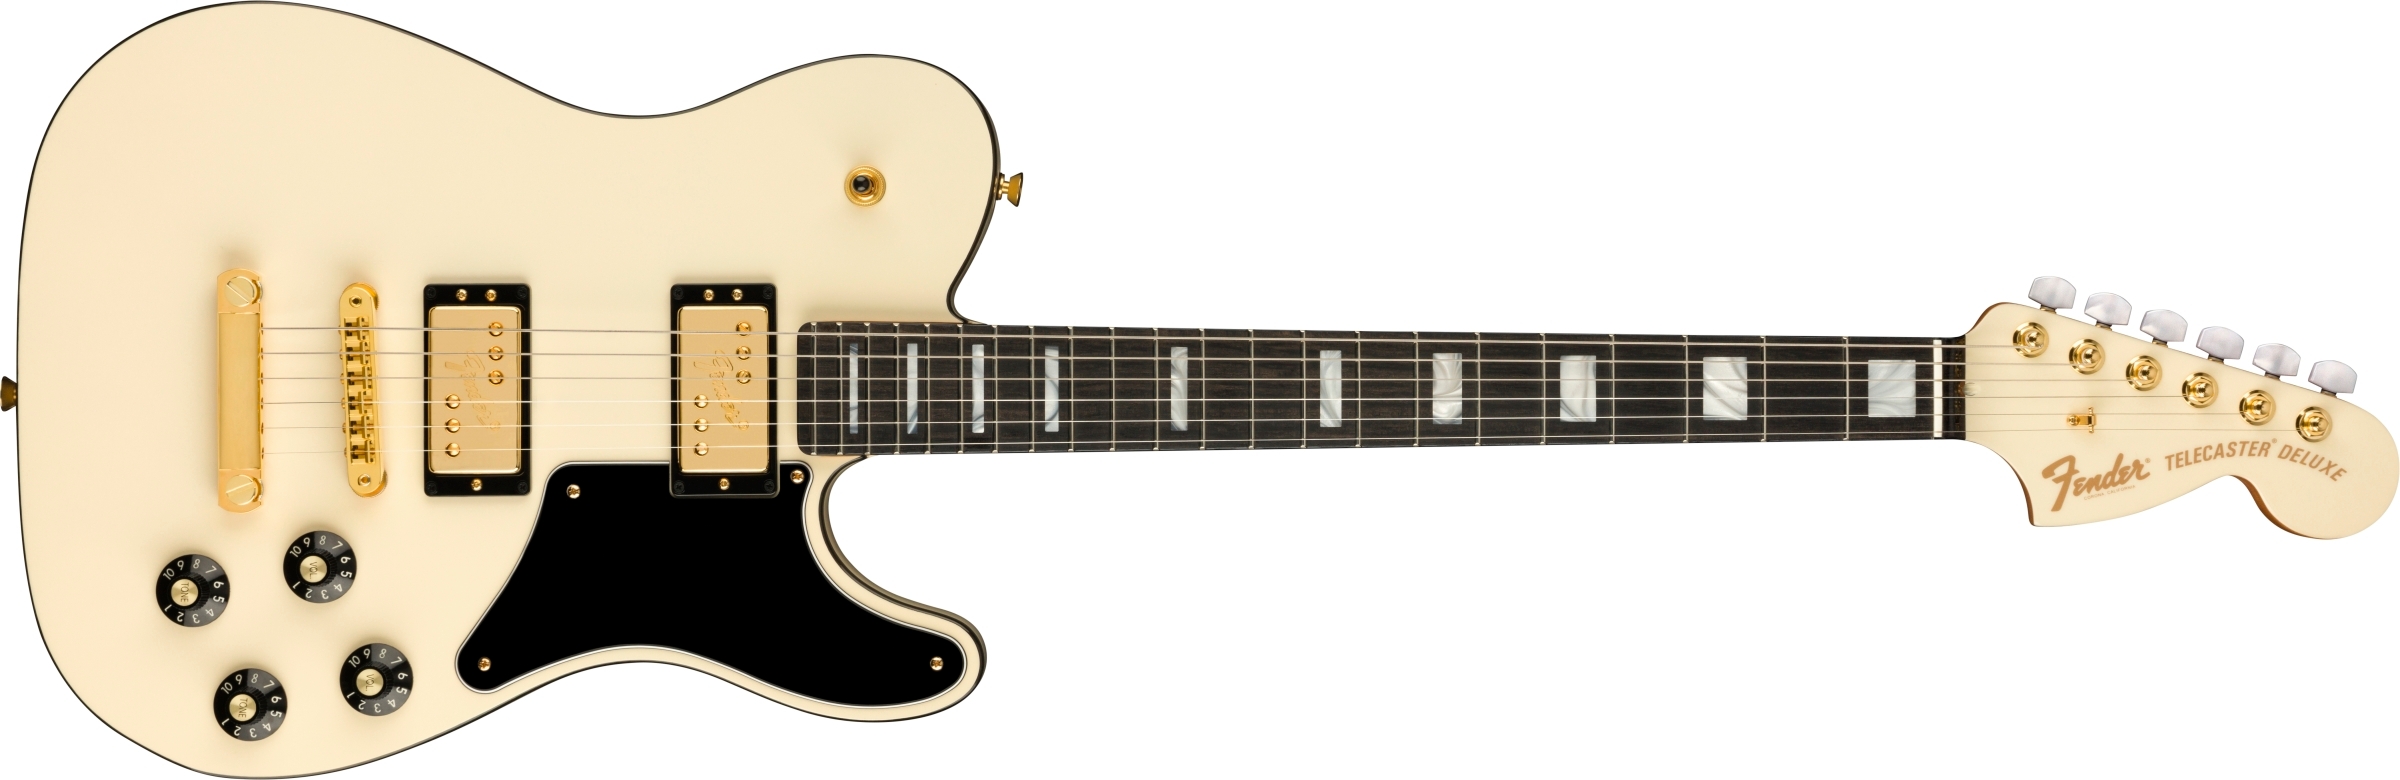 Fender Troublemaker Tele 【限定】【フェンダー】